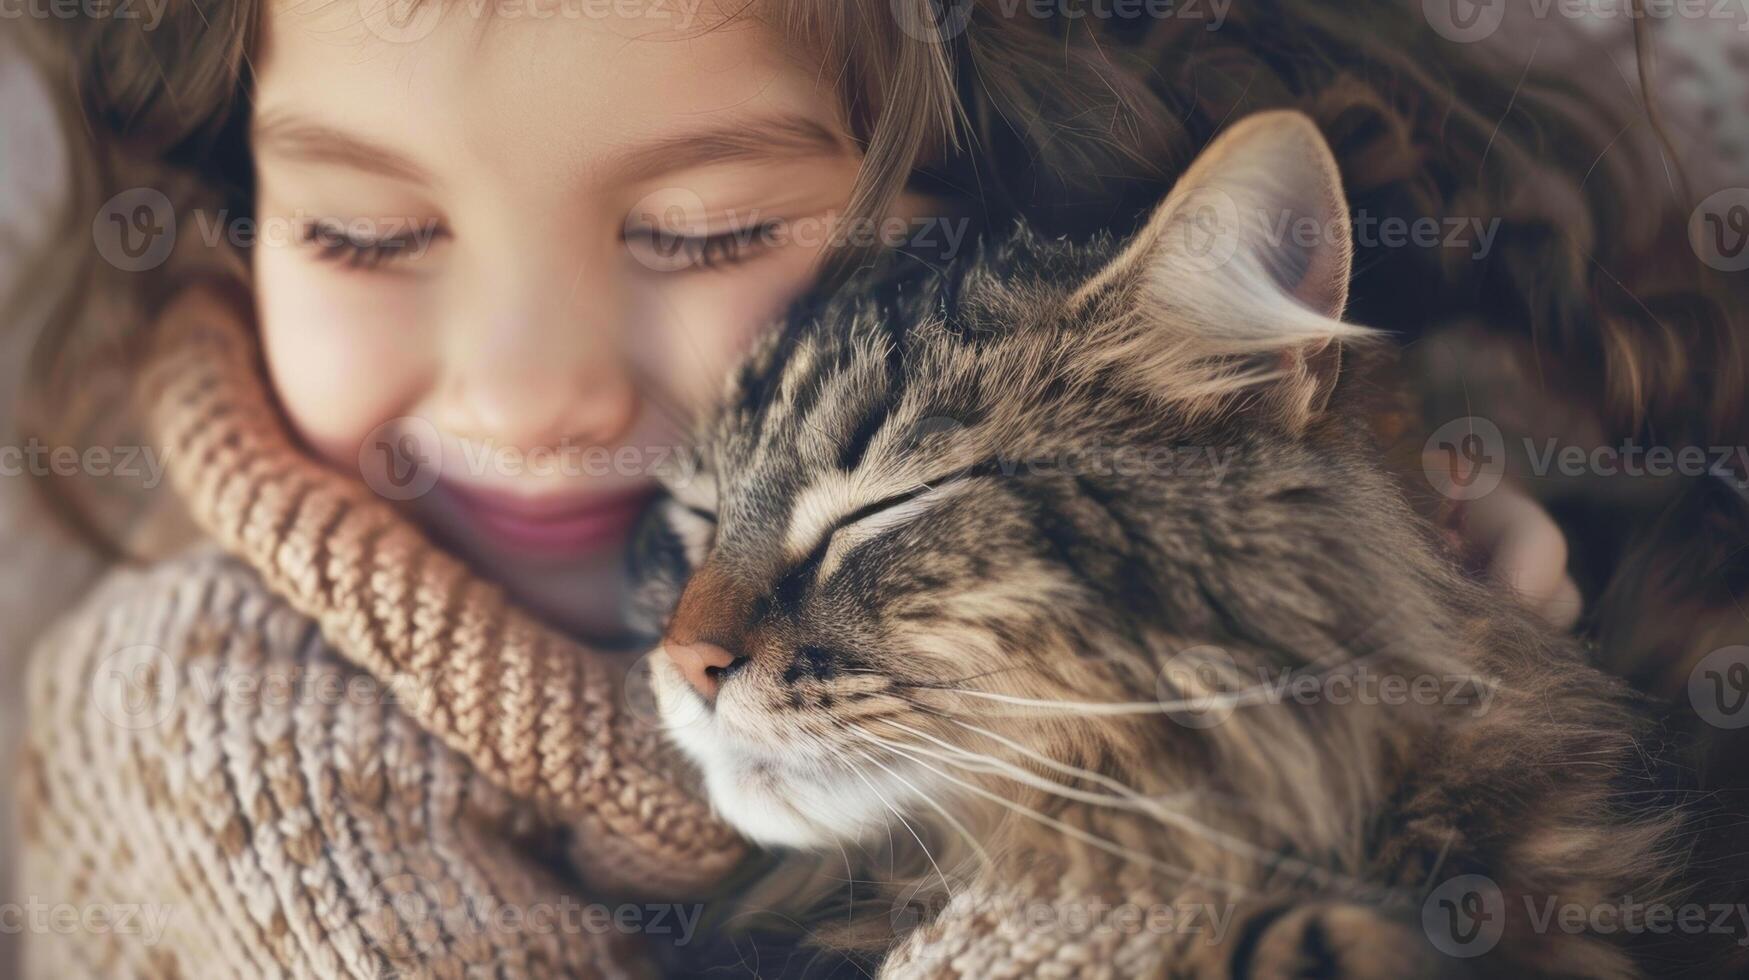 A child giggling as they hug a fluffy cat tightly their eyes closed and a smile on their face photo